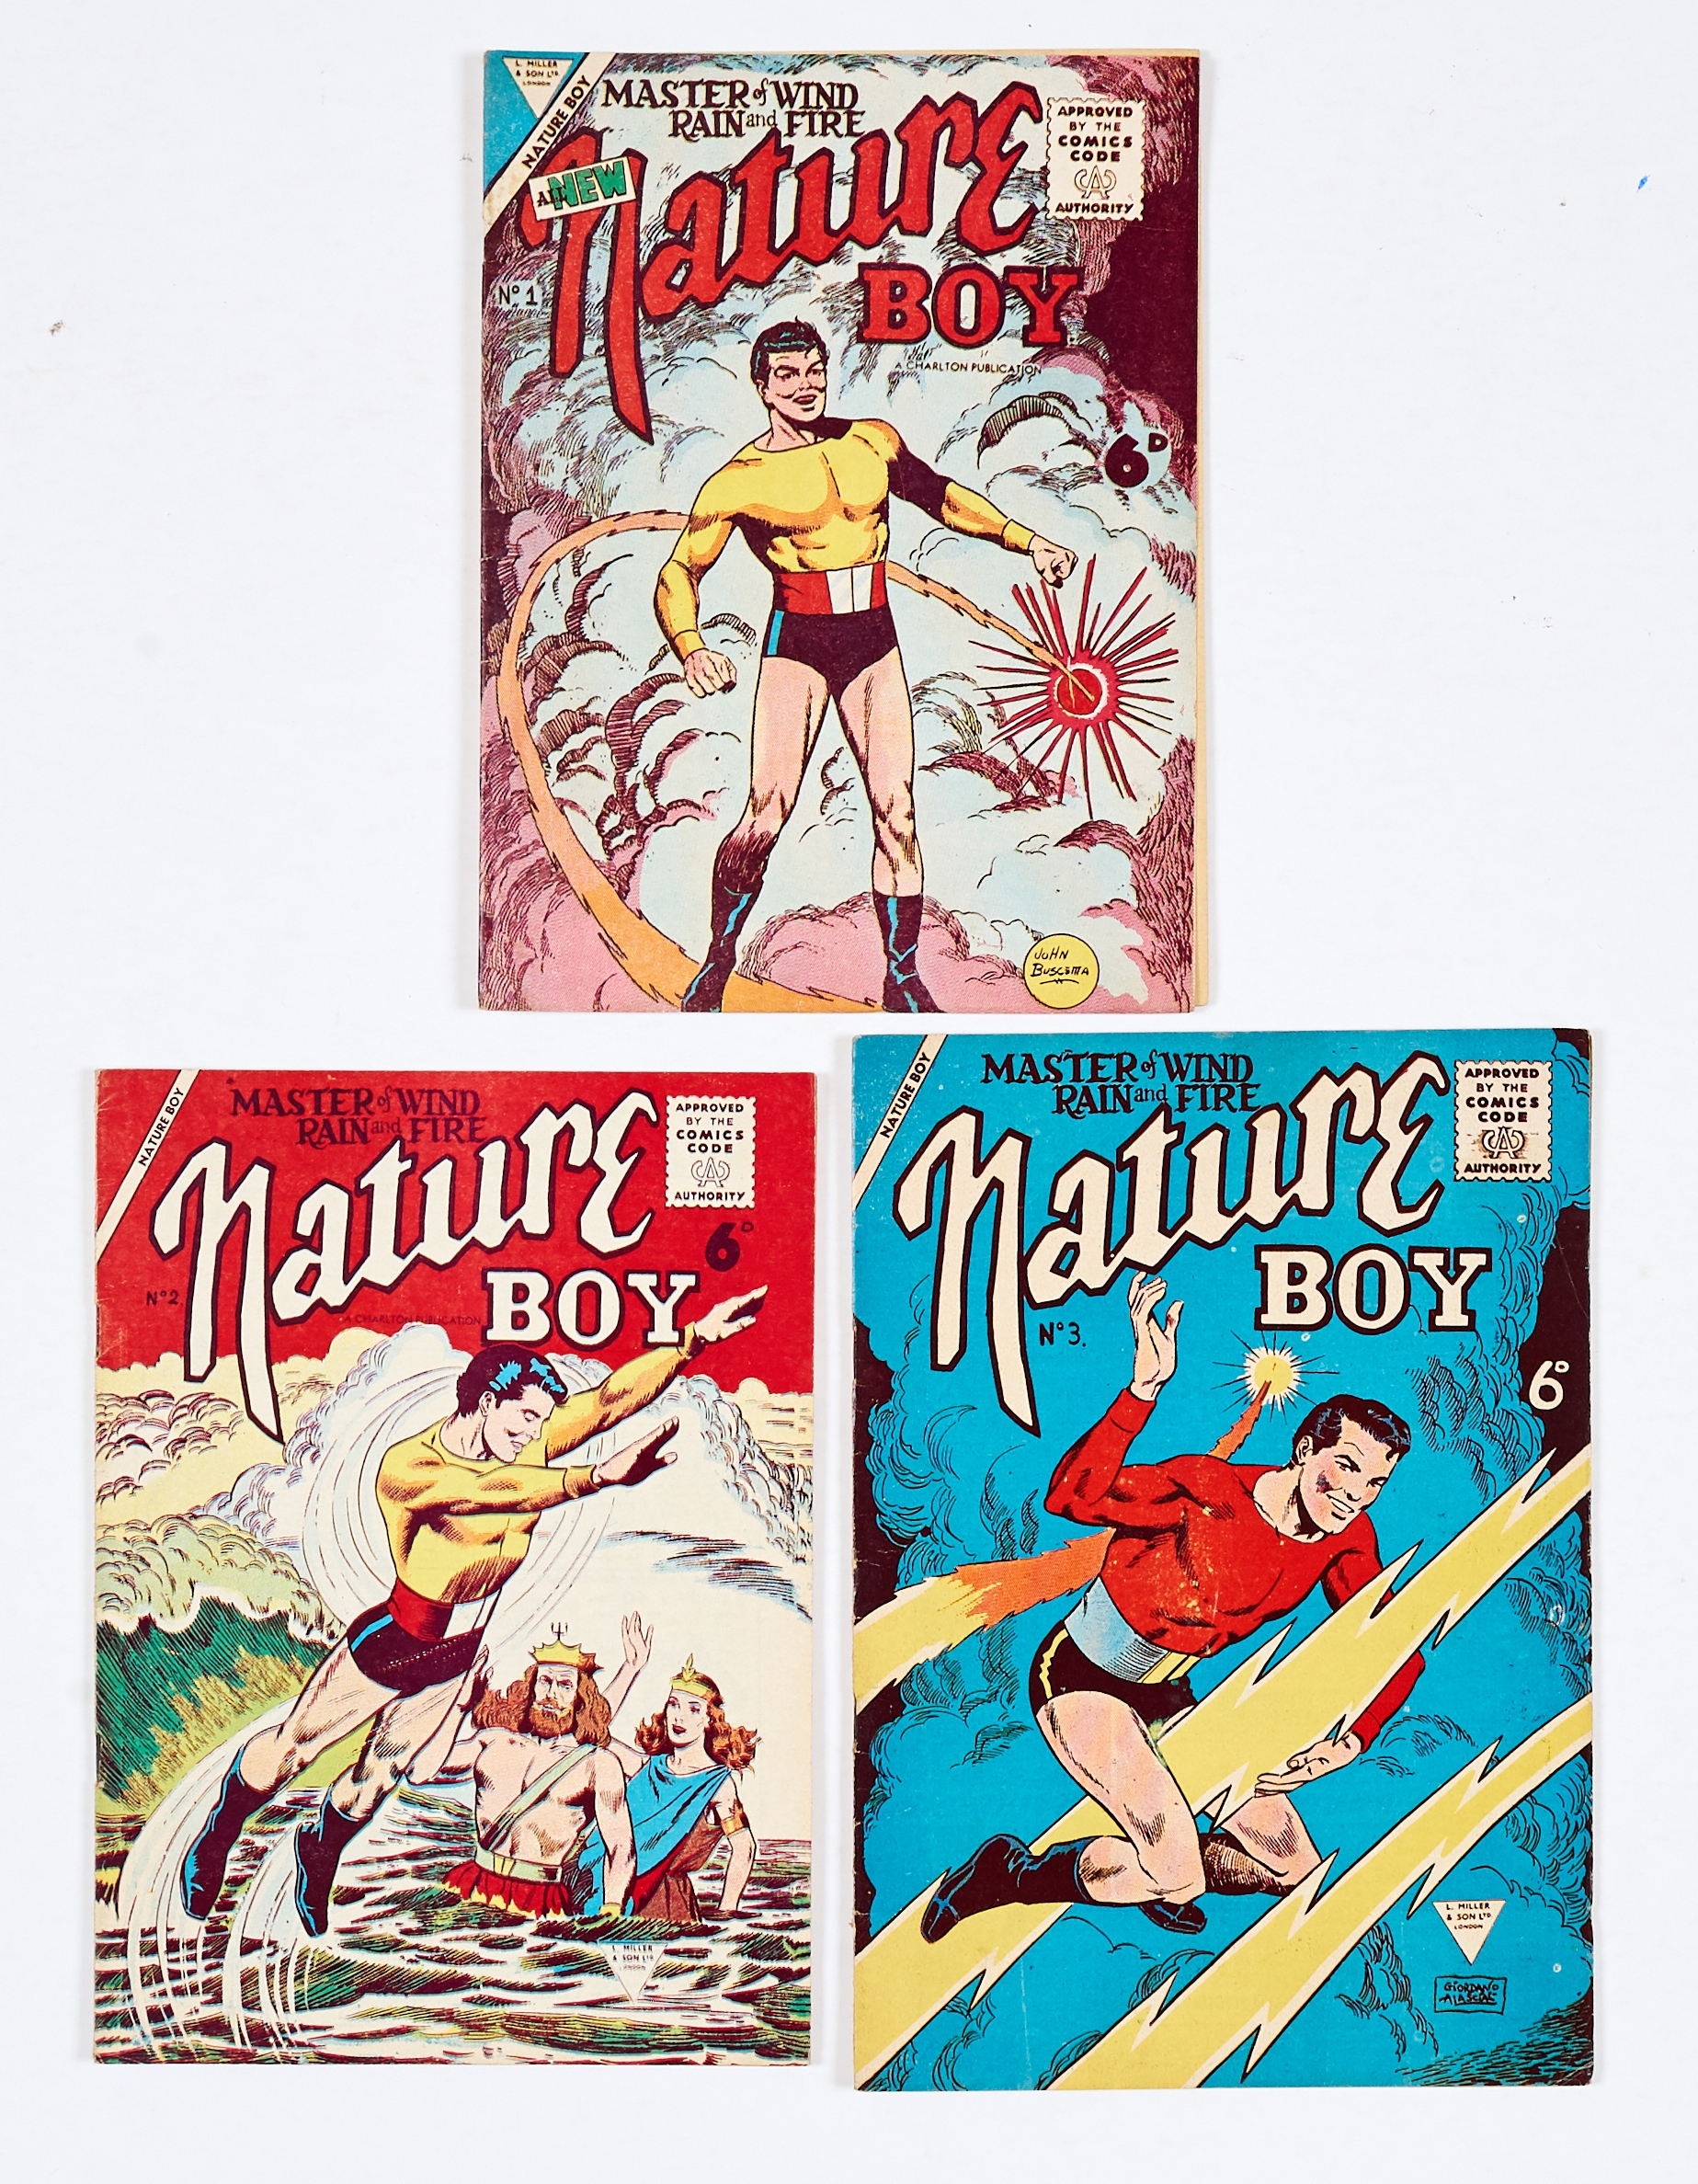 Nature Boy (1957 L Miller) 1-3. Charlton reprints complete run with John Buscema and Dick Giordano